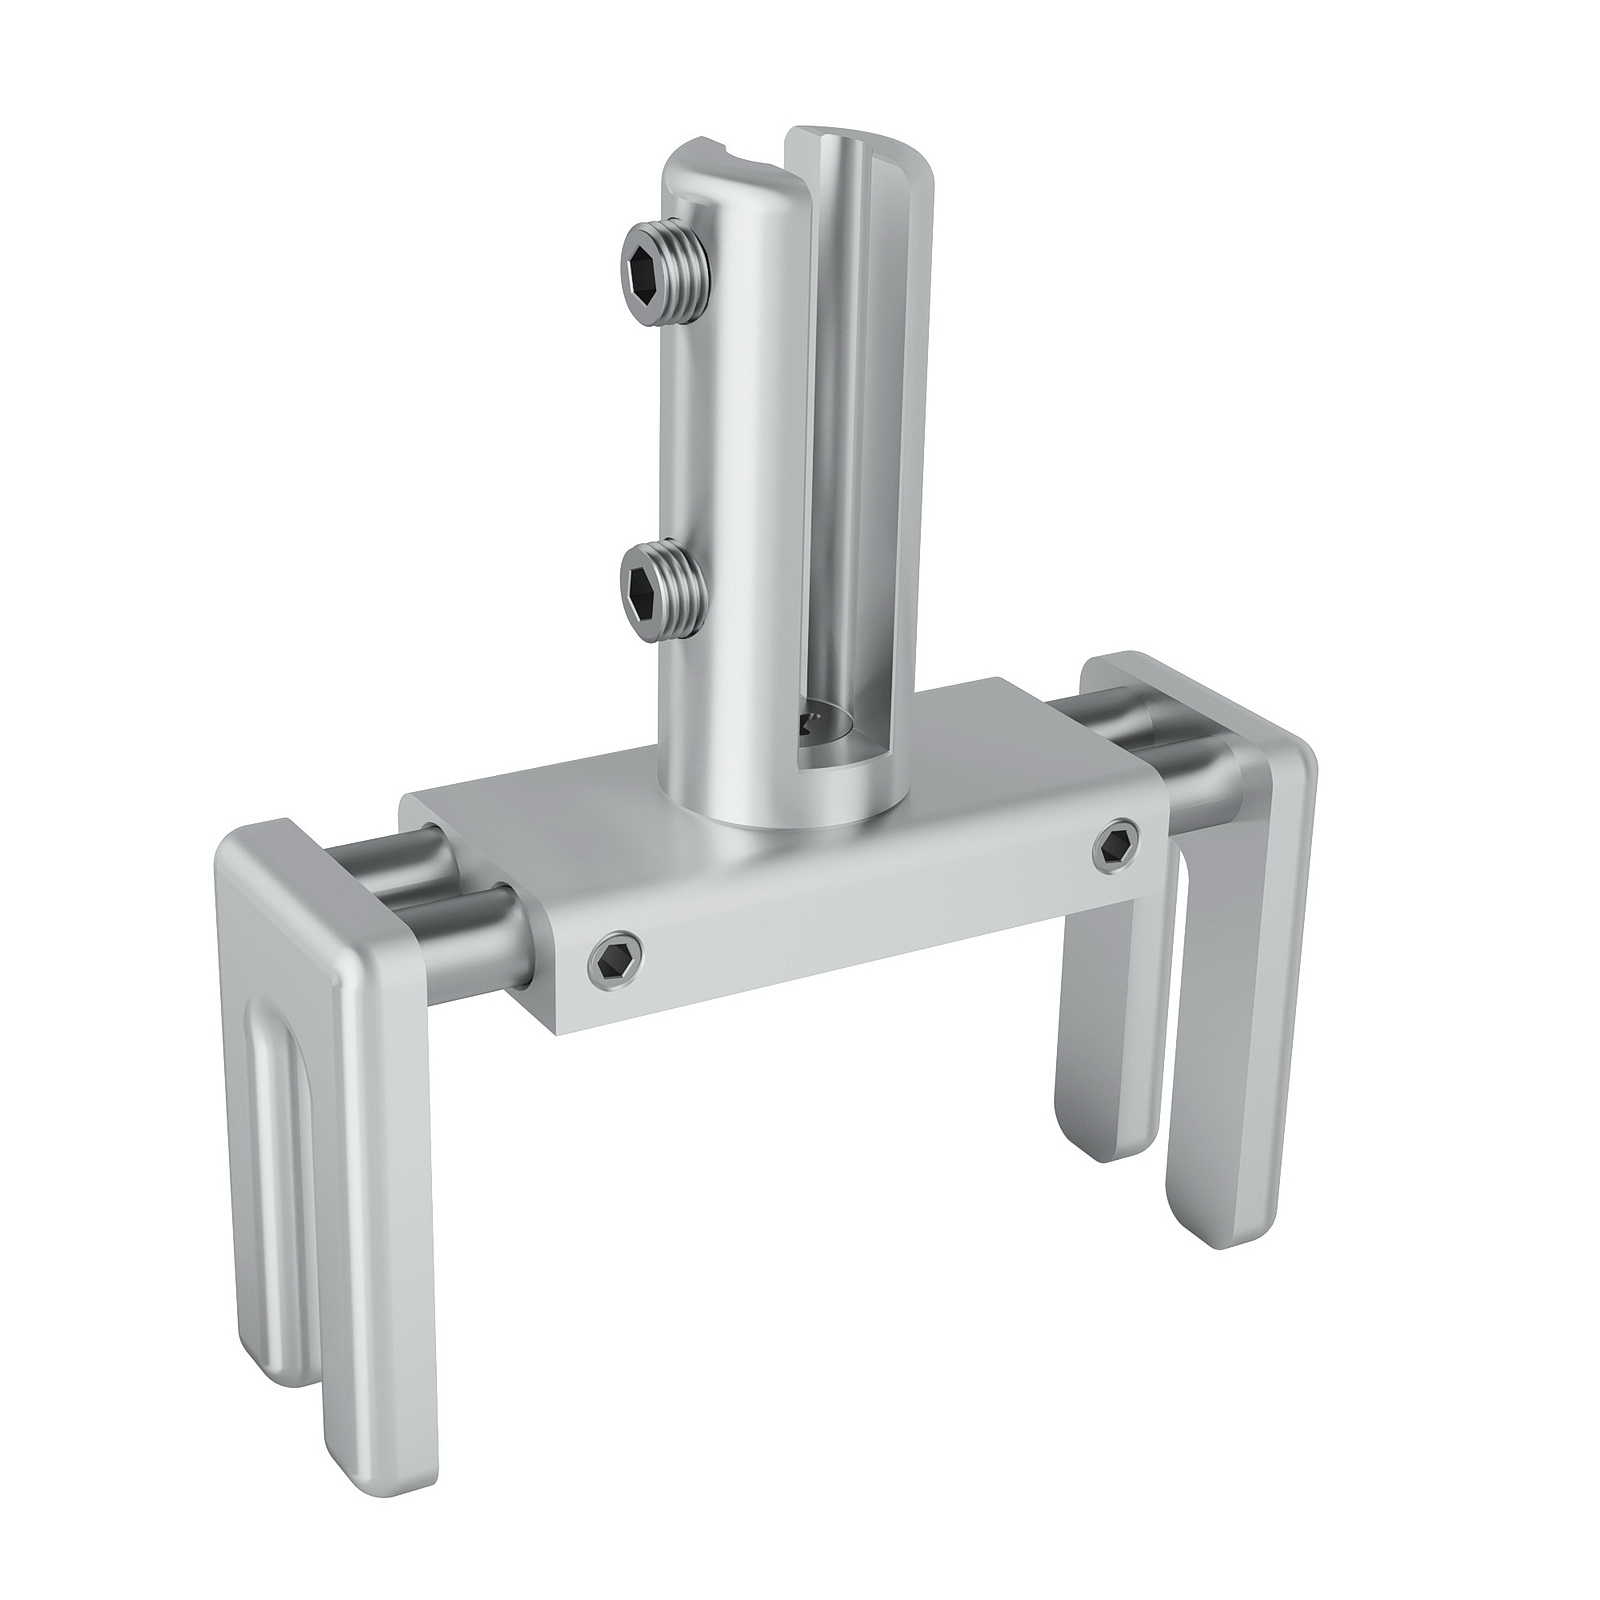 Set of 2, Adjustable Clamp, Aluminum Clear Anodized Finish, to Accommodate 1-3/4'' to 2-3/8'' Cubicle partition. Upt to 1/4'' material accepted on the fork (Included 4x 1'' and 4x 2'' bolt sur adjust clamp)